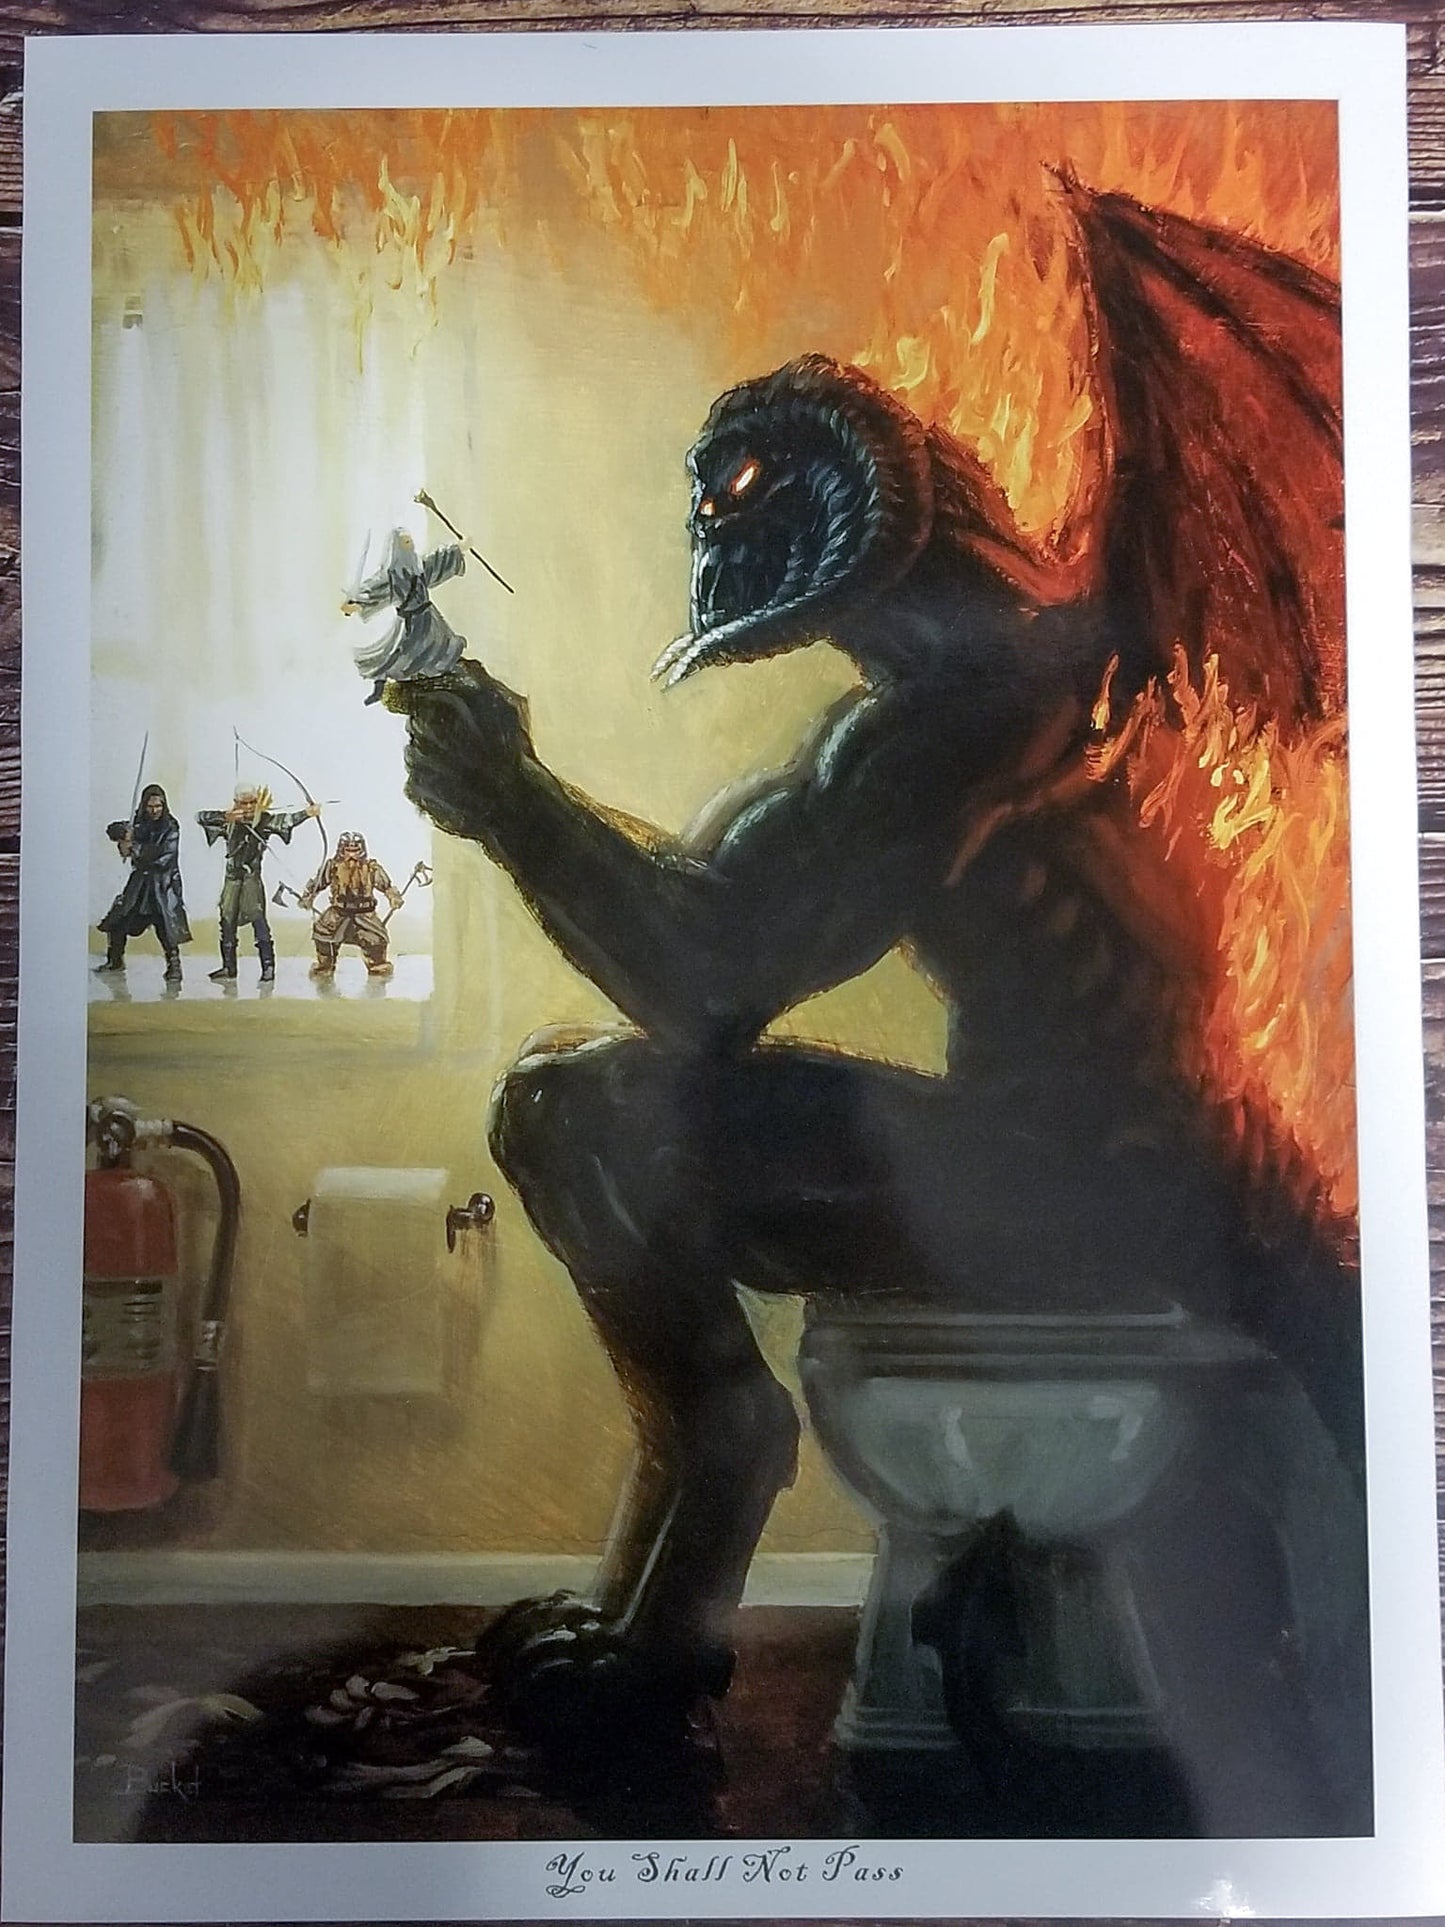 Balrog "You Shall Not Pass" (The Lord of the Rings) Bathroom Parody Art Print